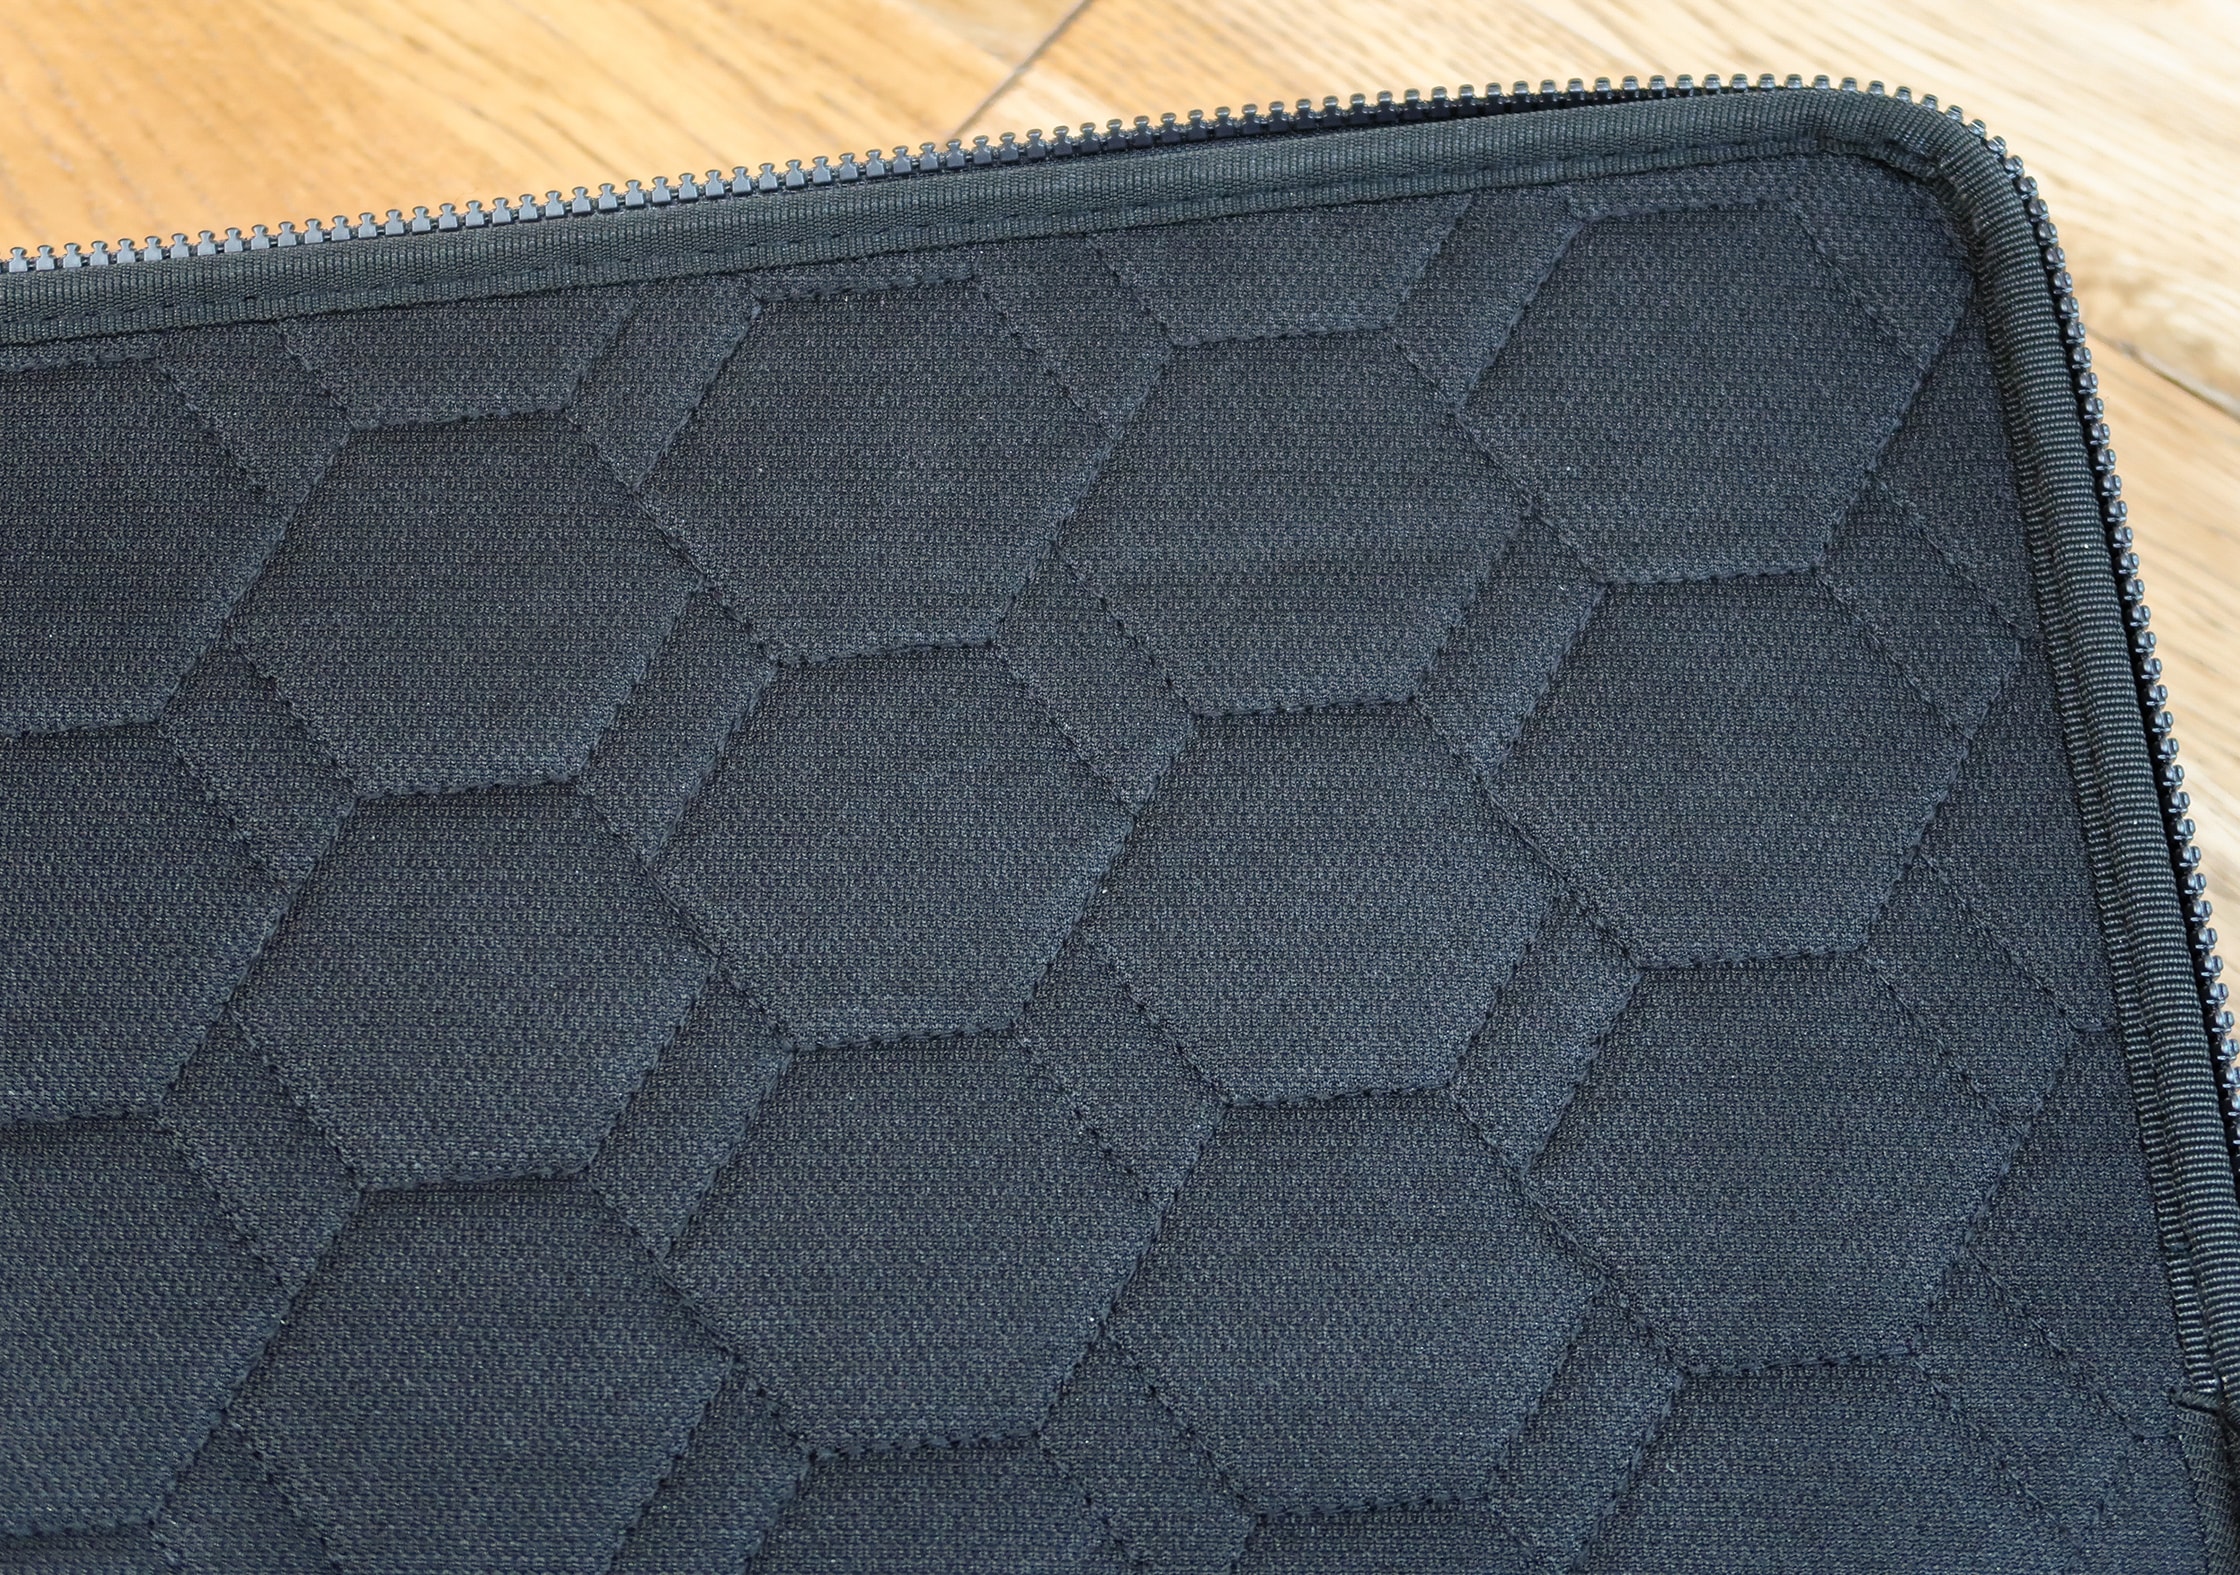 Interior Padding Of The Thule Gauntlet 3.0 Laptop Sleeve